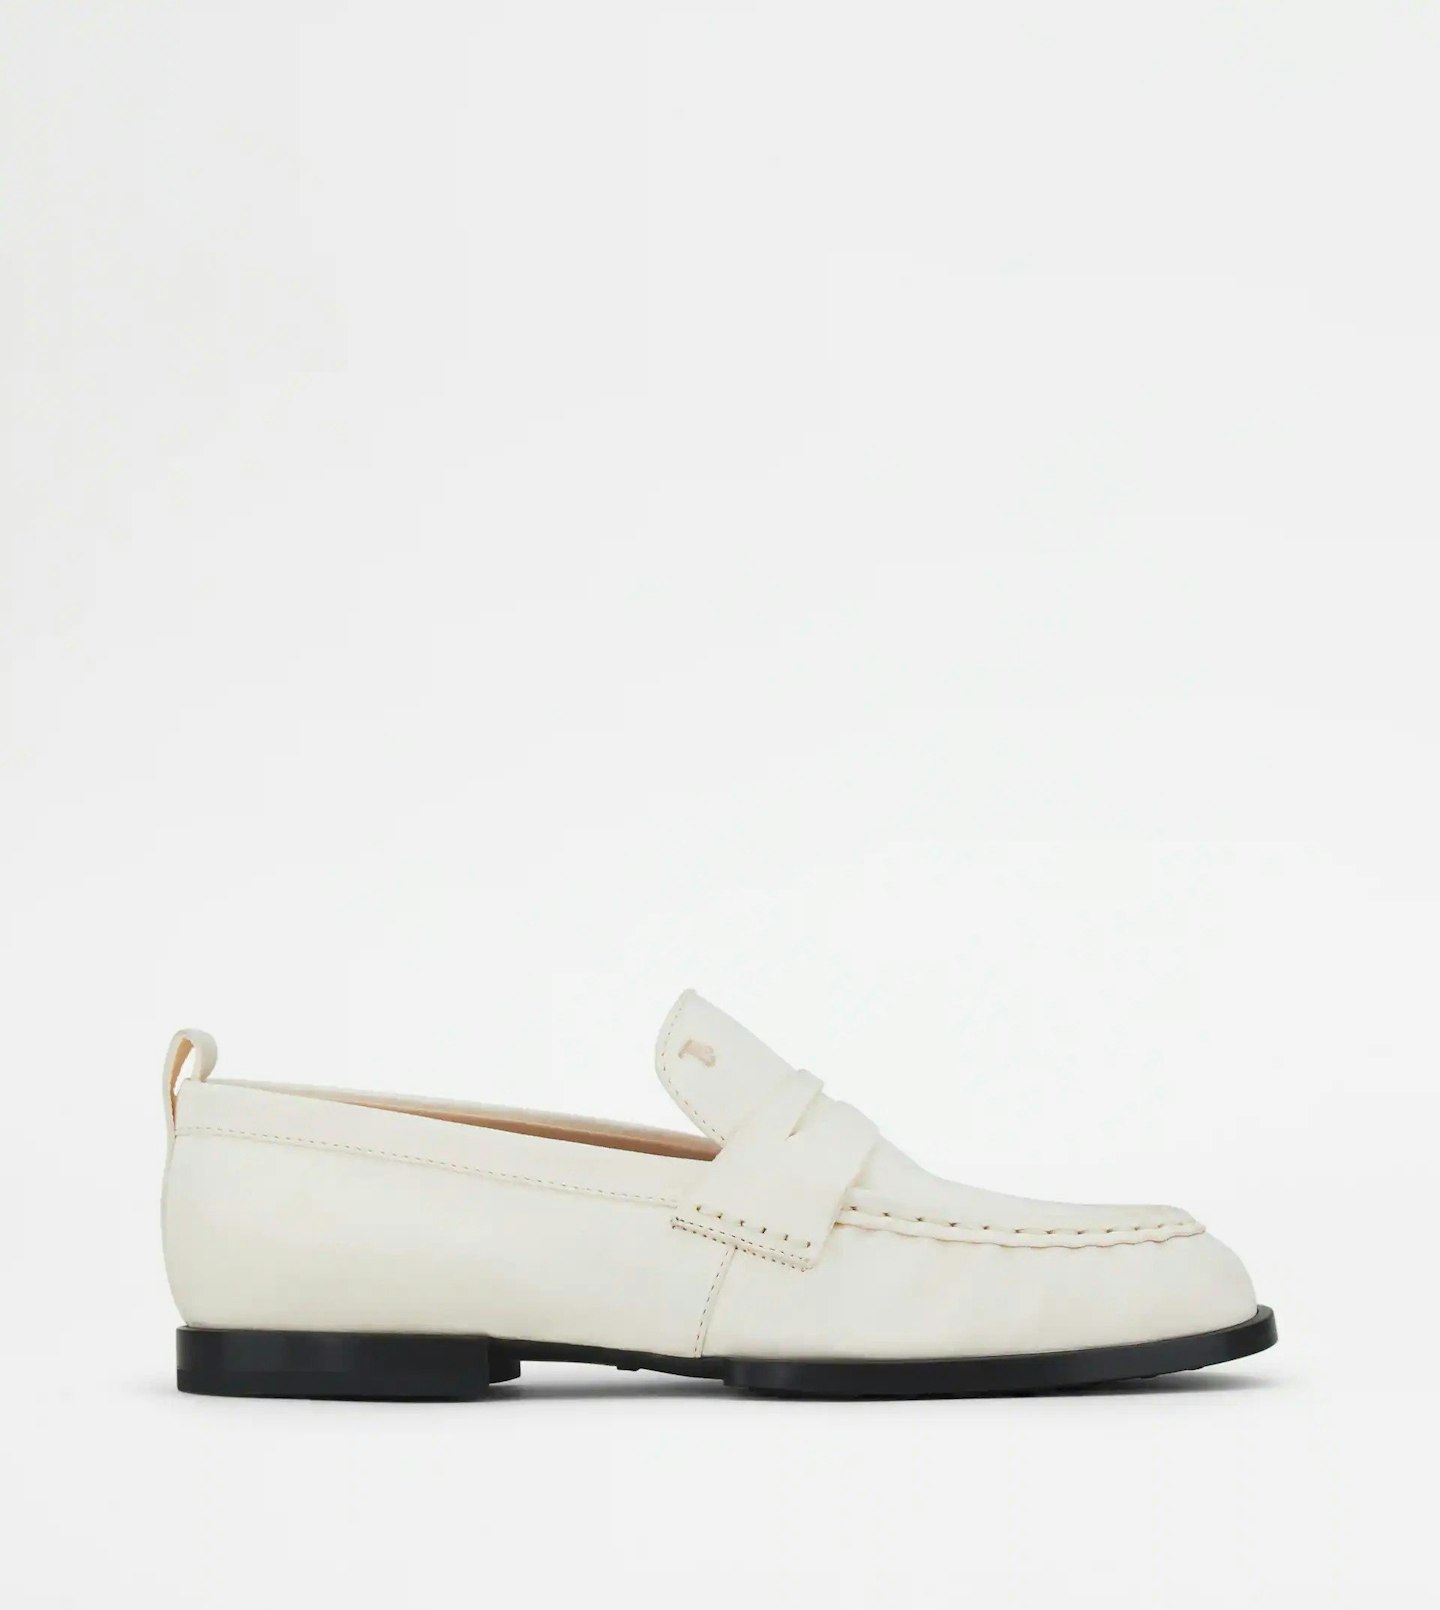 Stylish Loafers - Tods